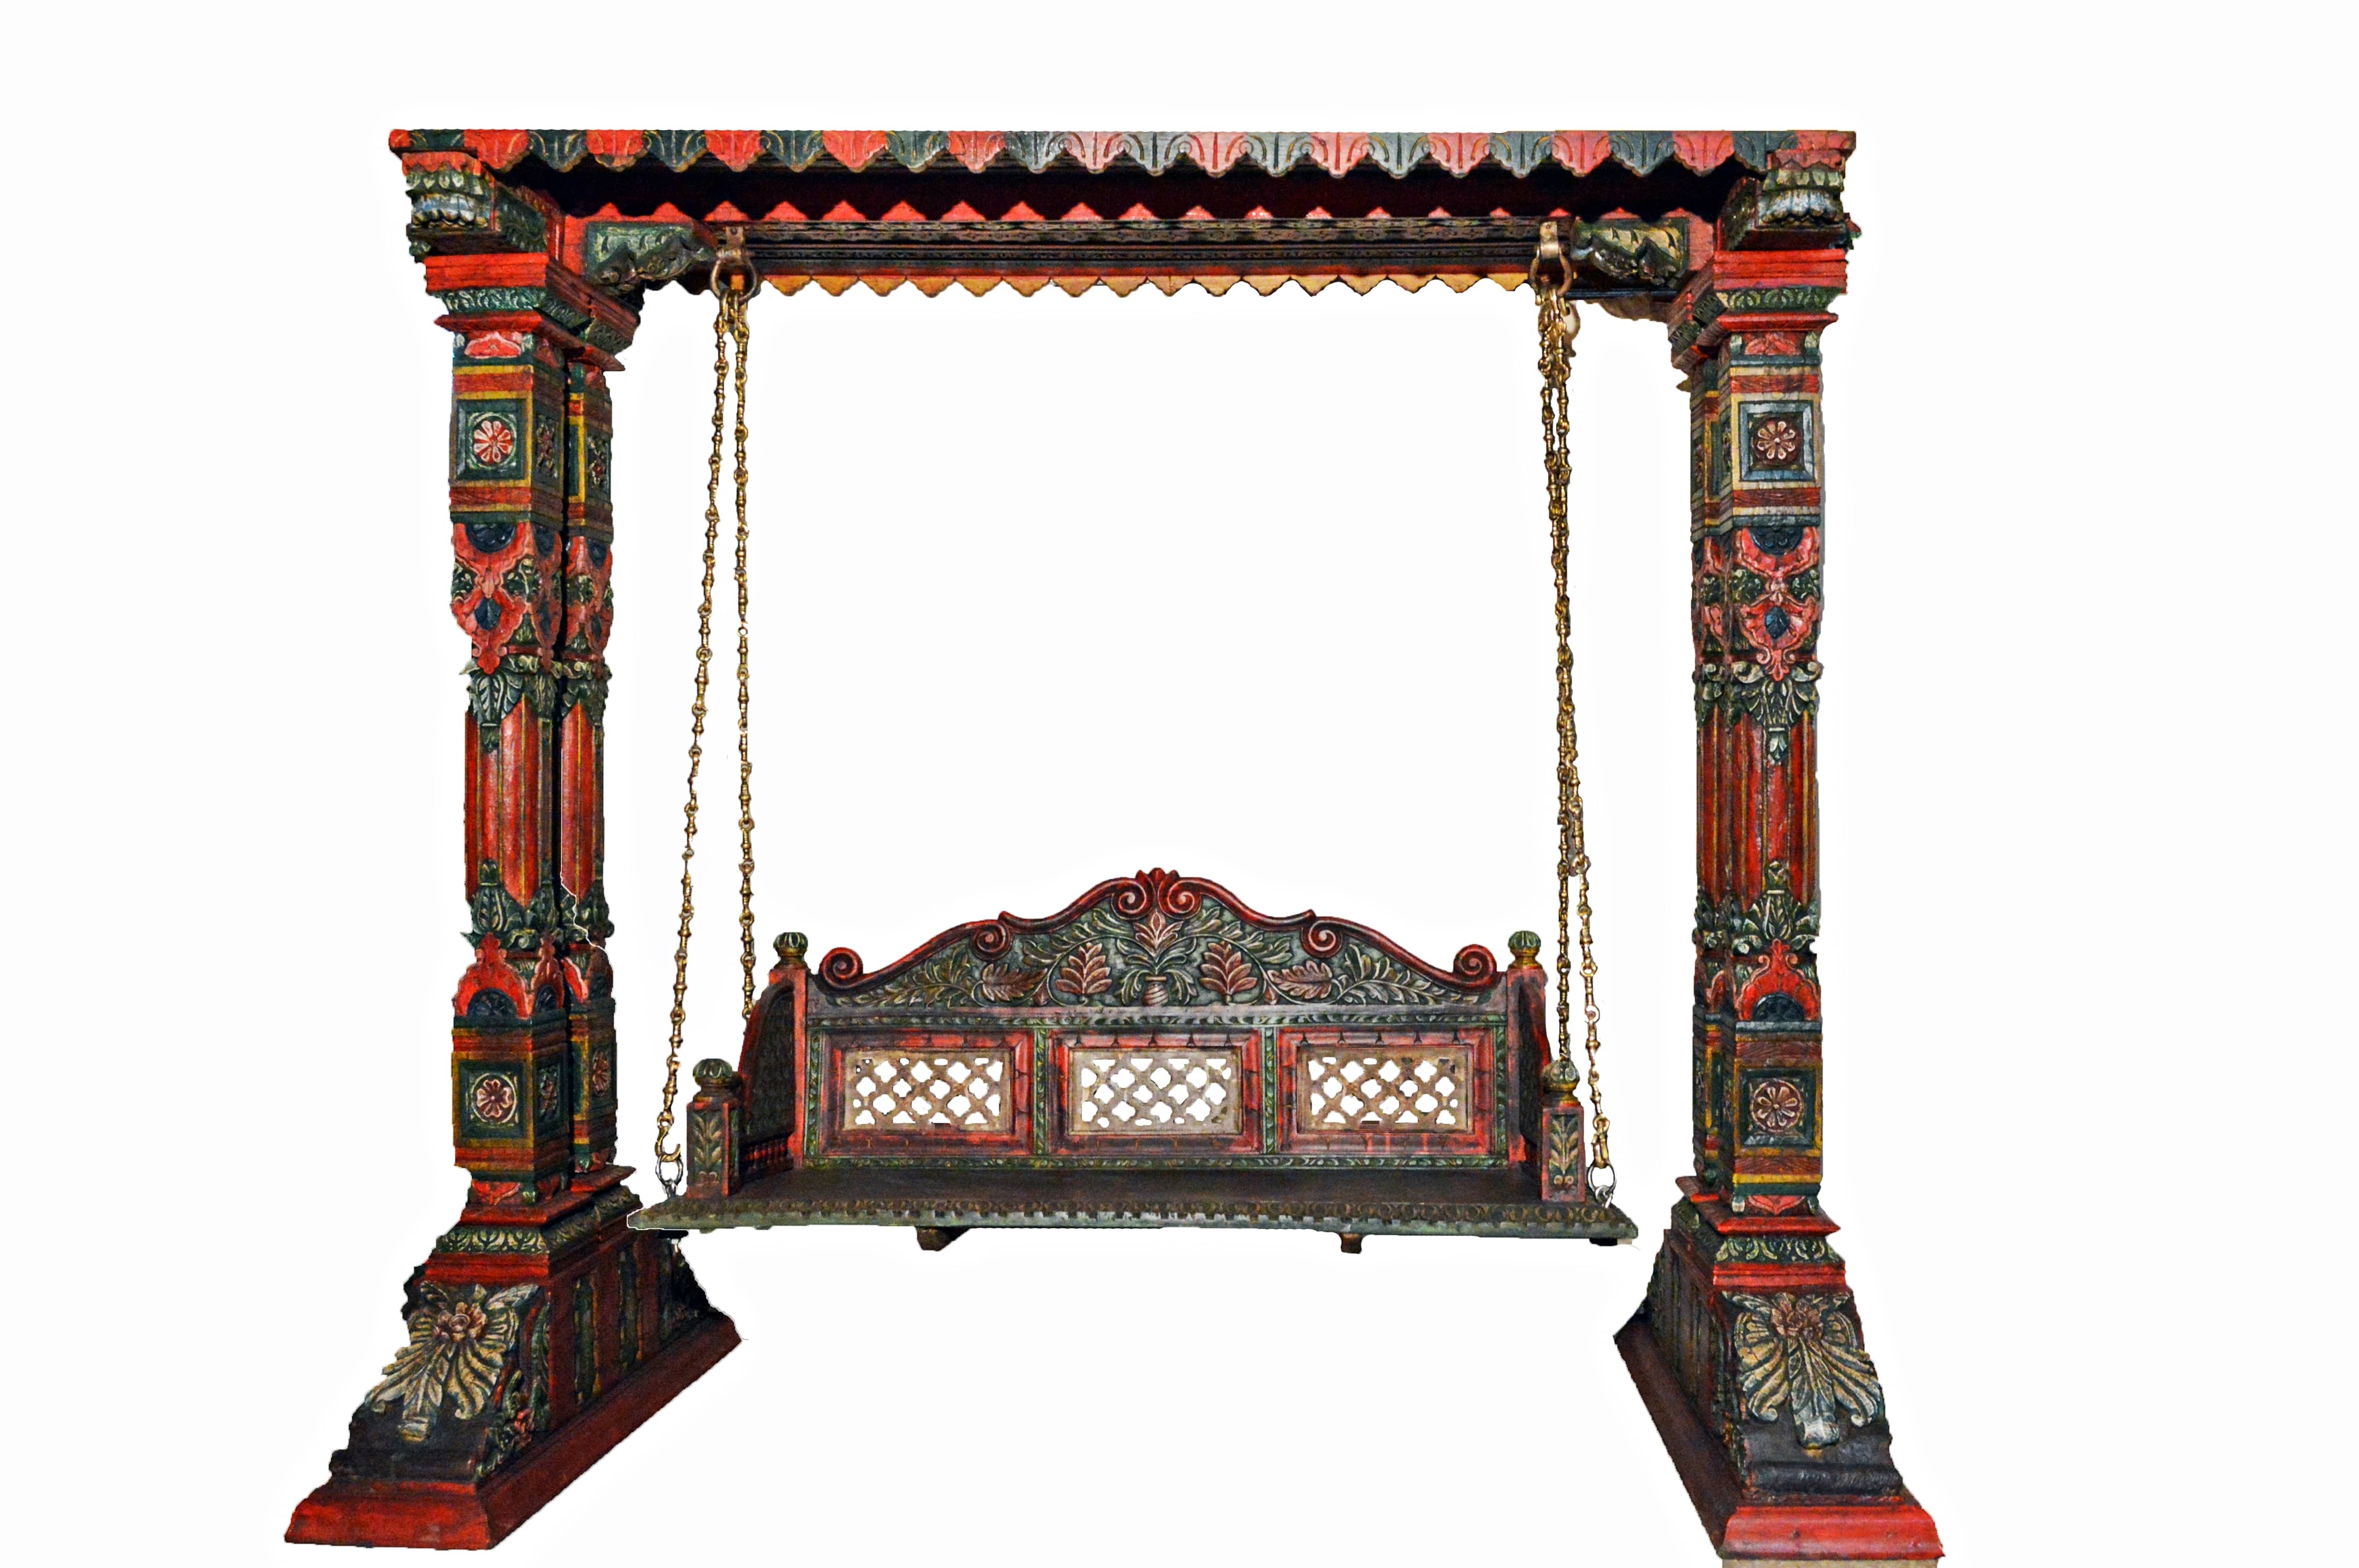 Two Pillar Design Painted Wooden Carved Royal Swing Set